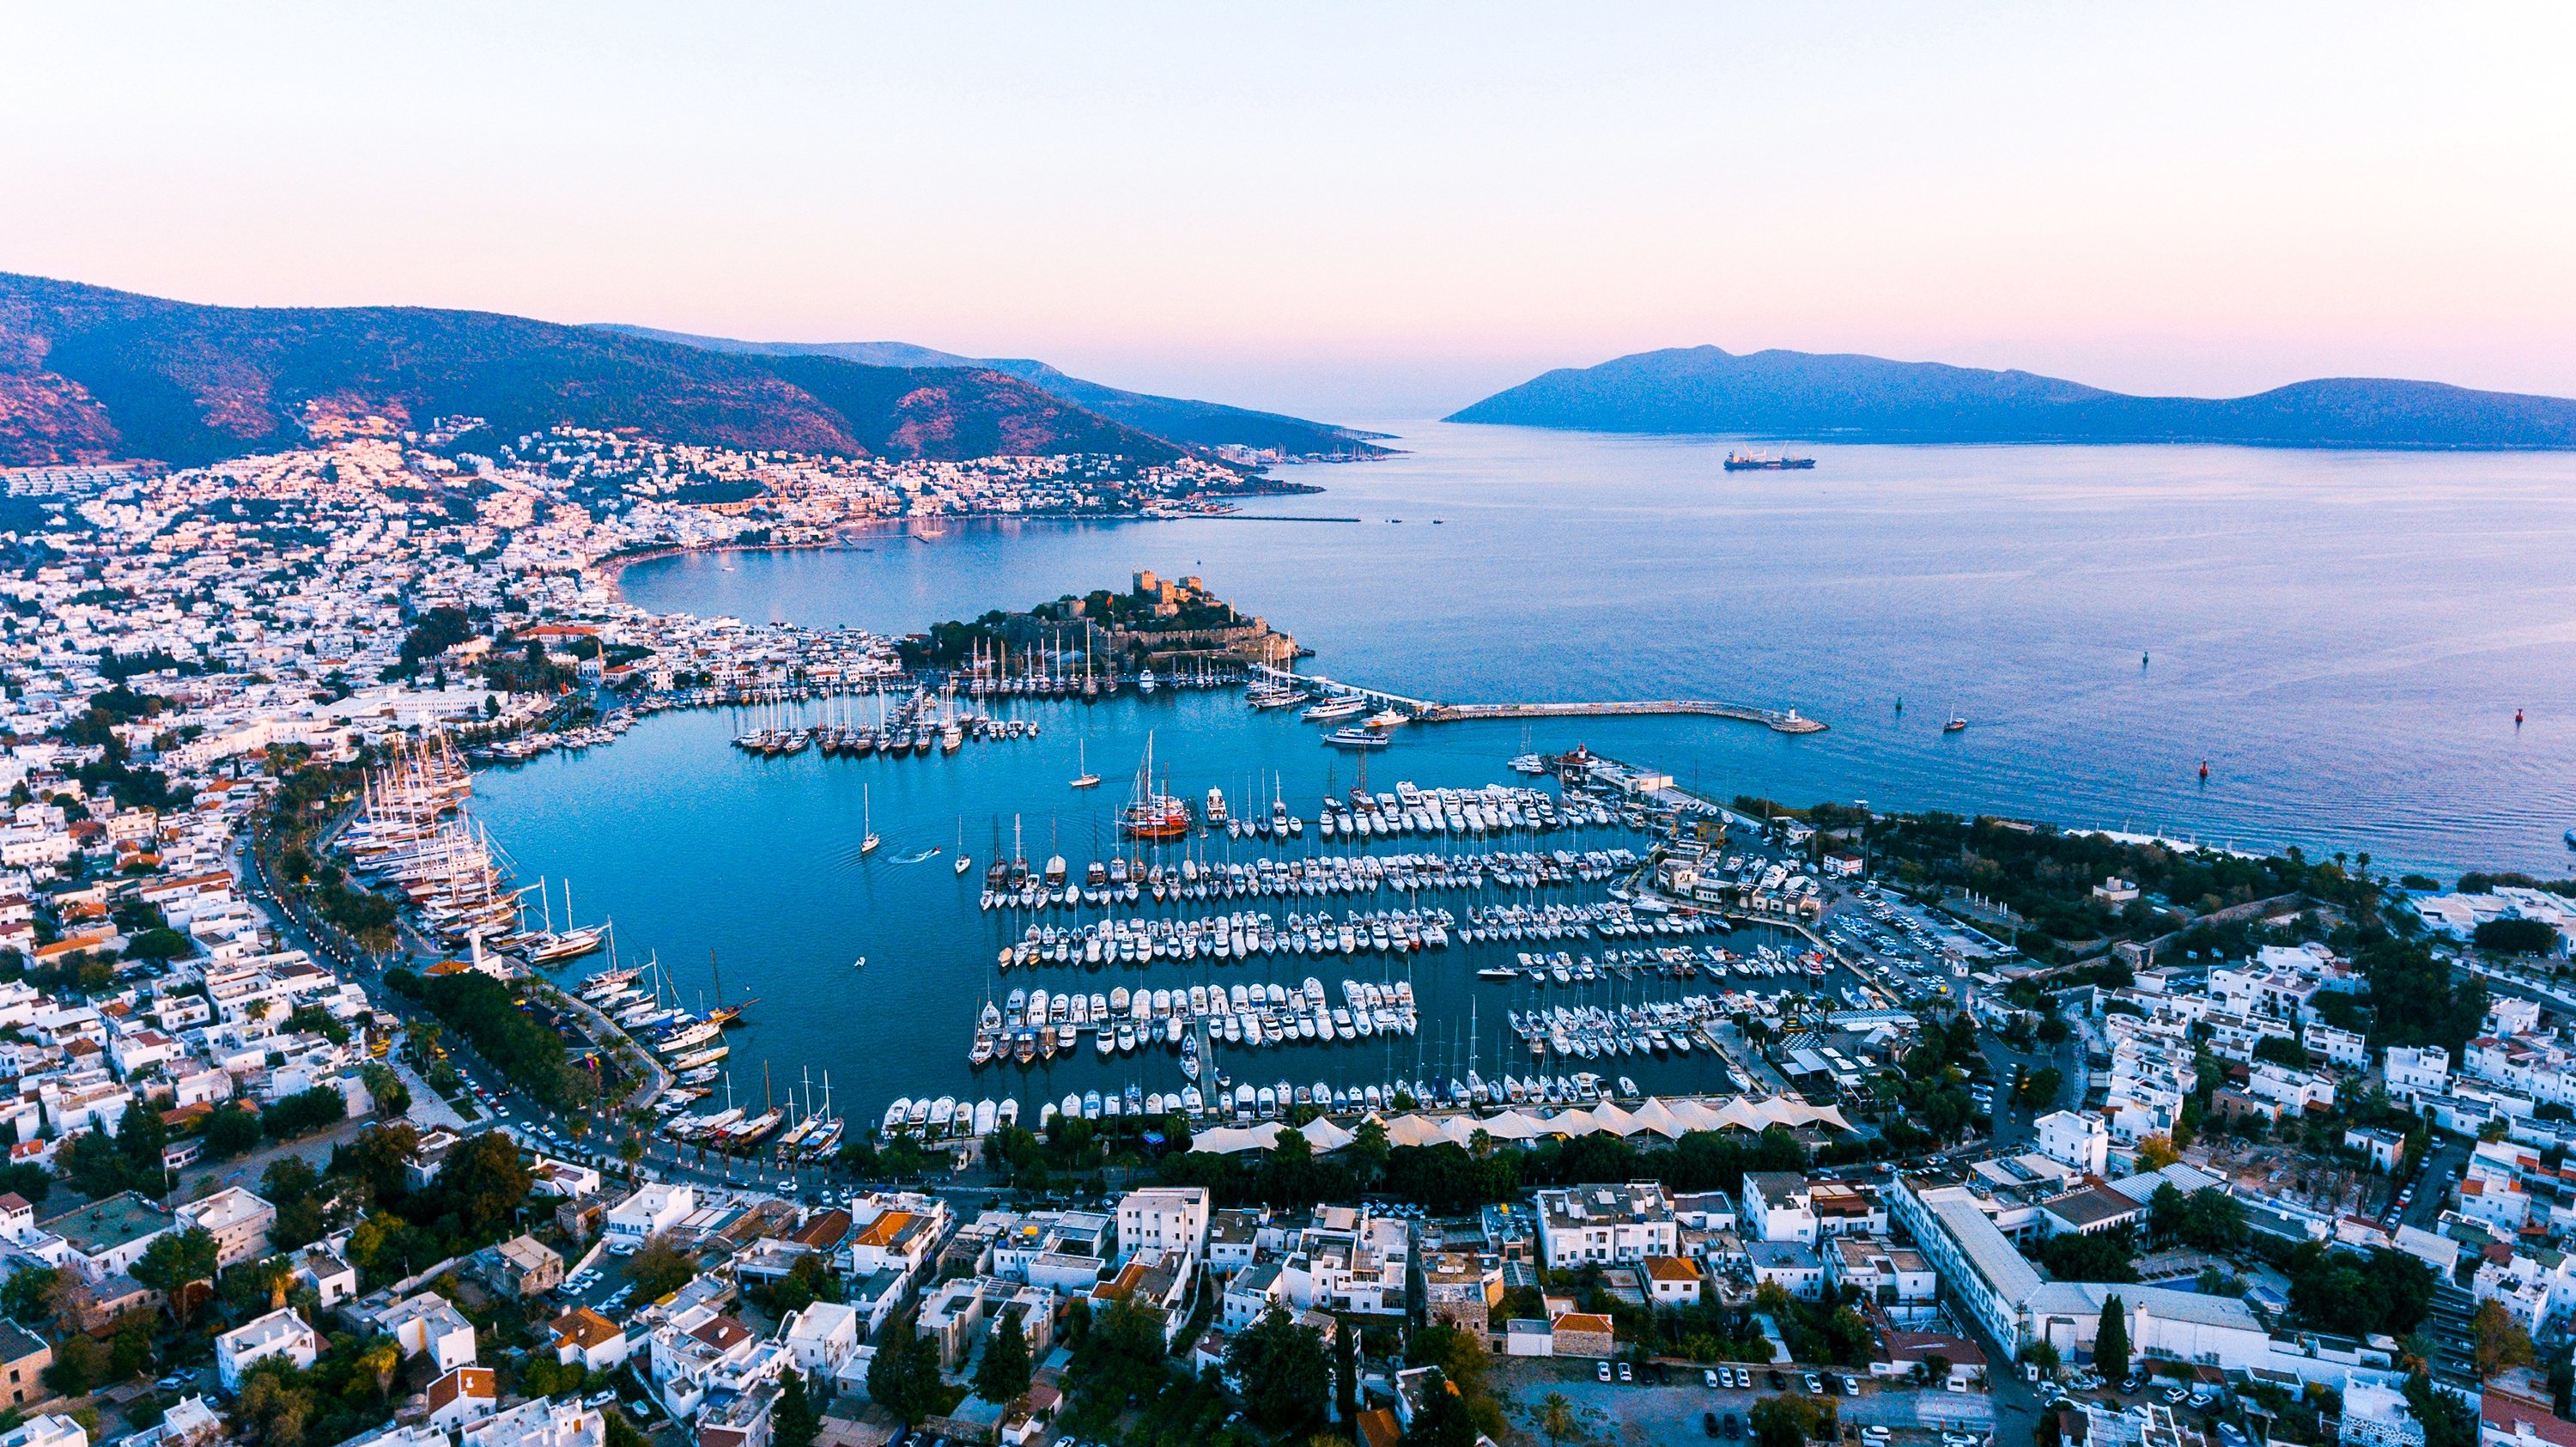 For the love of Turkey's Riviera: Bodrum's famous vacationers | Daily Sabah